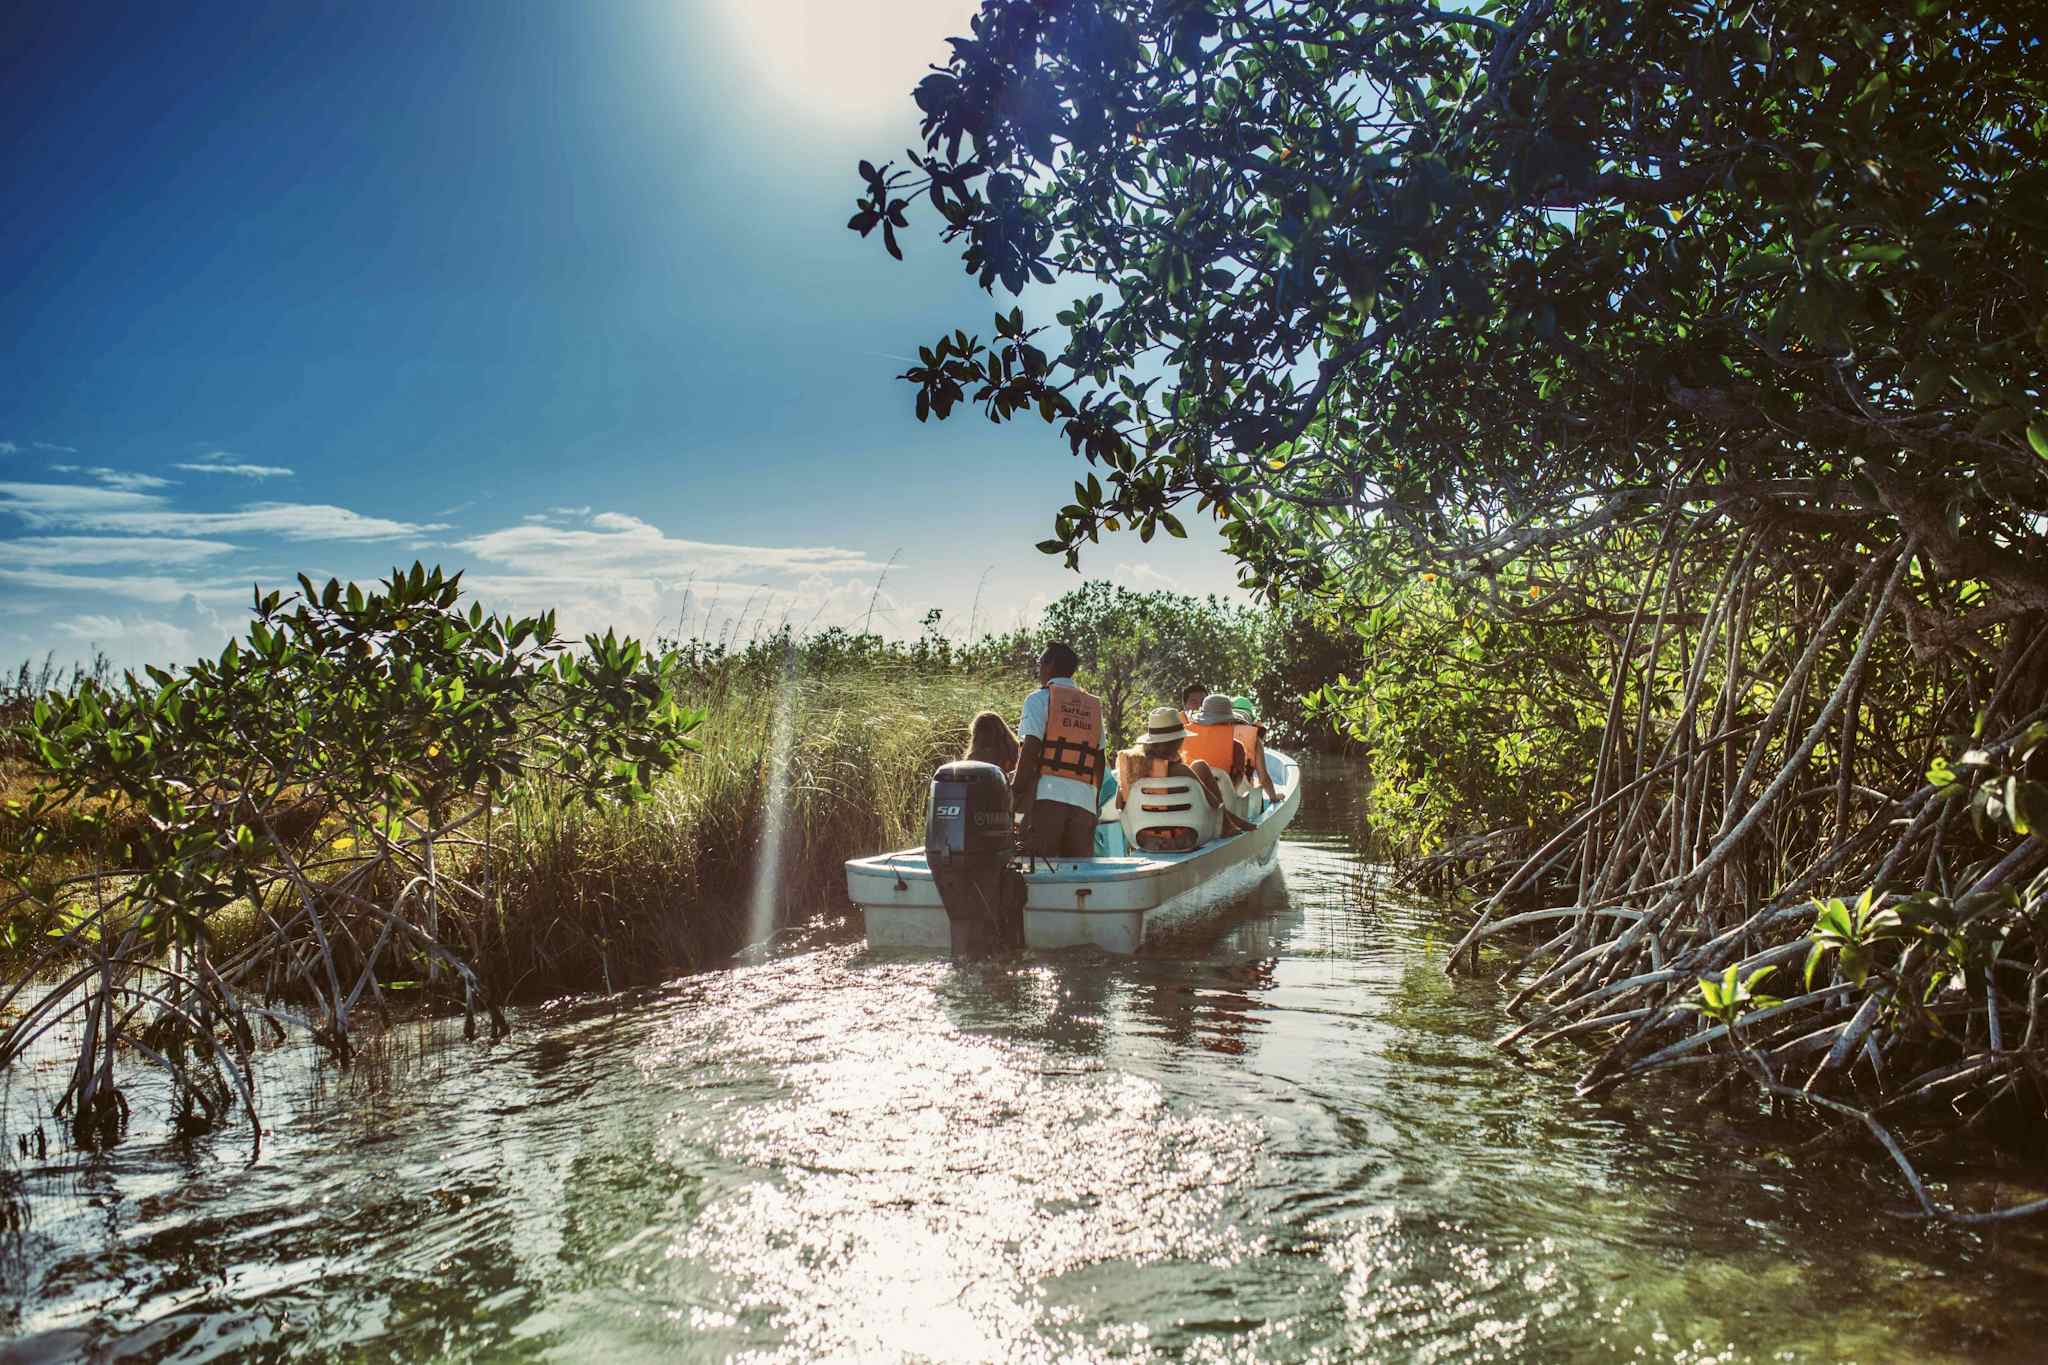 Boat ride in Sian Ka'an biosphere reserve, Mexico.